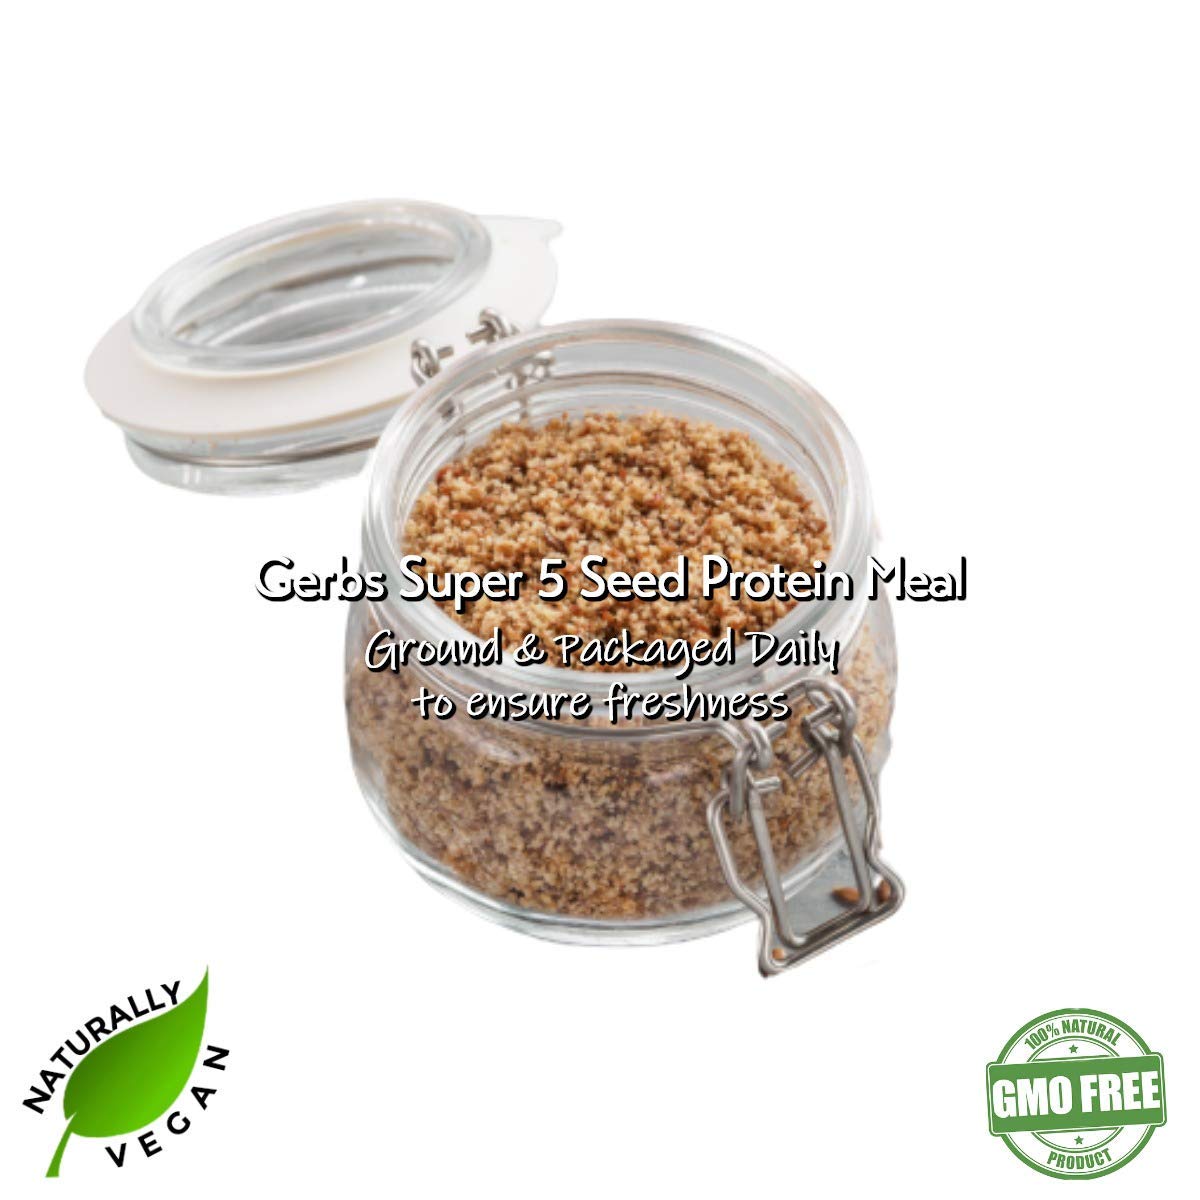 GERBS Ground Super 5 Seed Protein Meal 1 LB. | Freshly Harvested Season | Use in yogurt, smoothies, cereal, oatmeal, cookies, baking | Packed with Fiber, Protein | Heart Healthy Antioxidant Rich|Top 14 Food Allergen Free | Non-GMO, Keto & Paleo